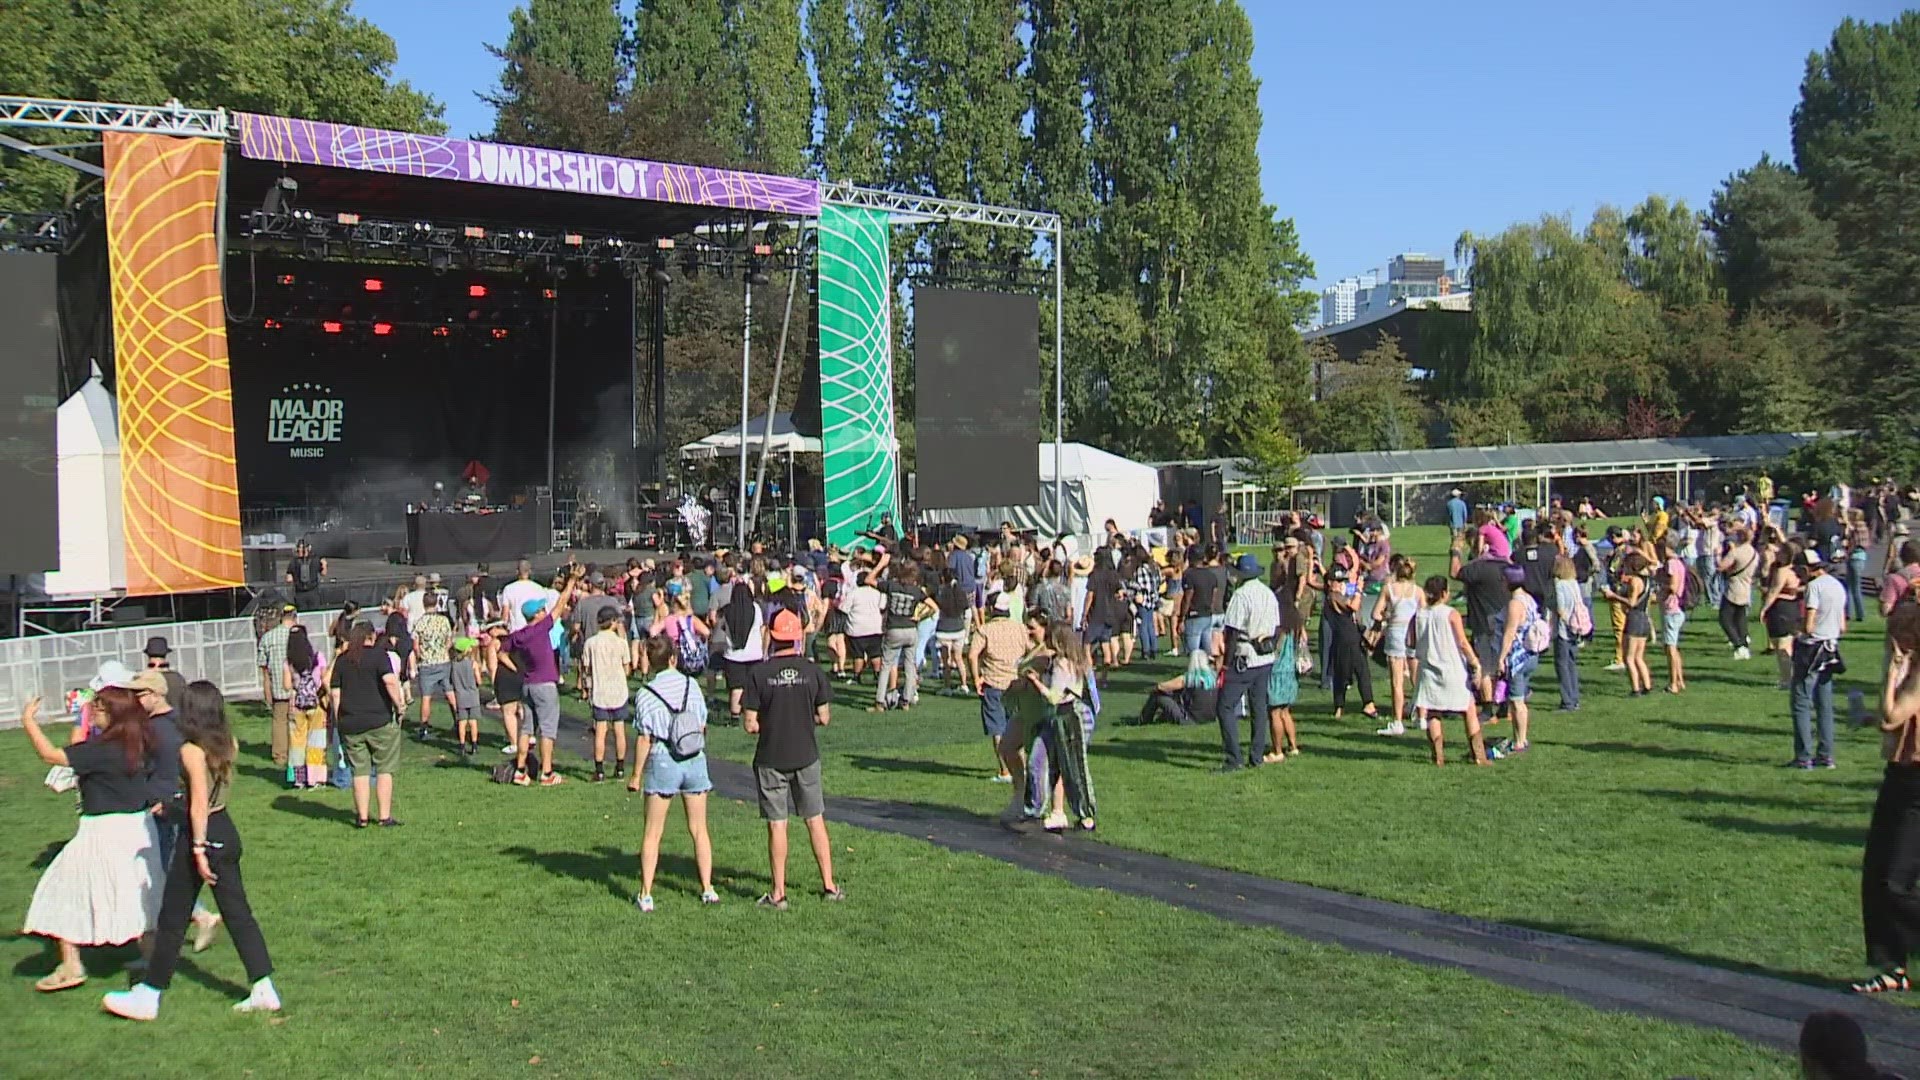 Happening through Sunday, Sept. 3, Bumbershoot festival offers music, culture, art and more.